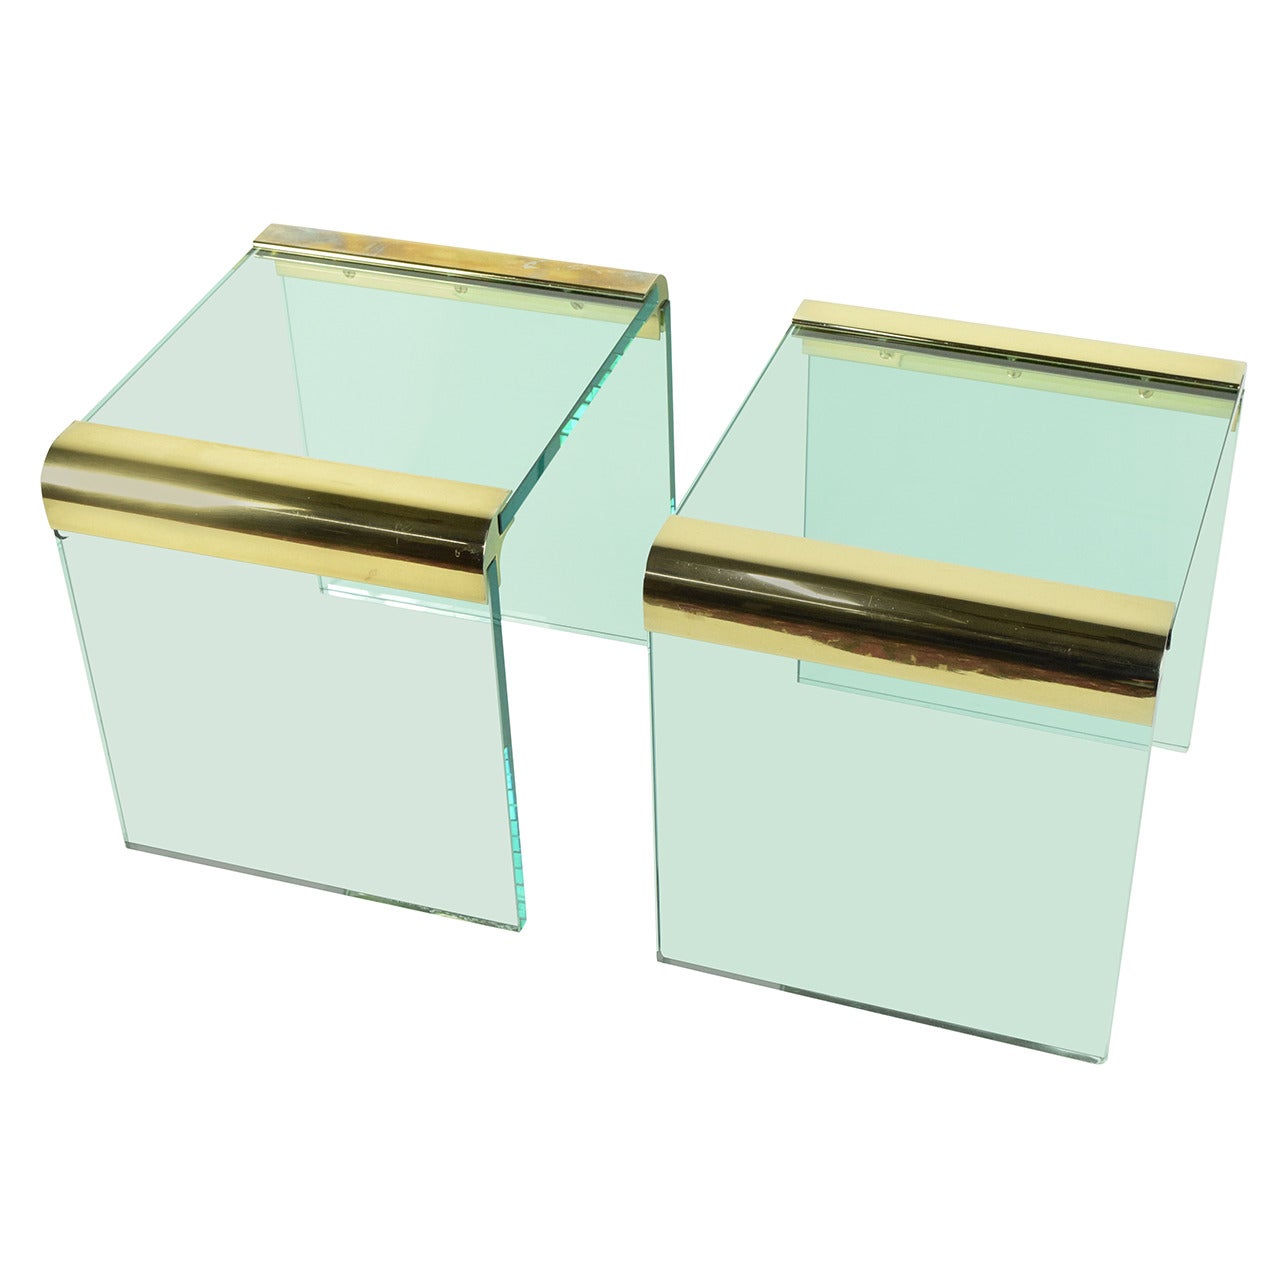 Pair of Pace Brass & Glass Side Tables